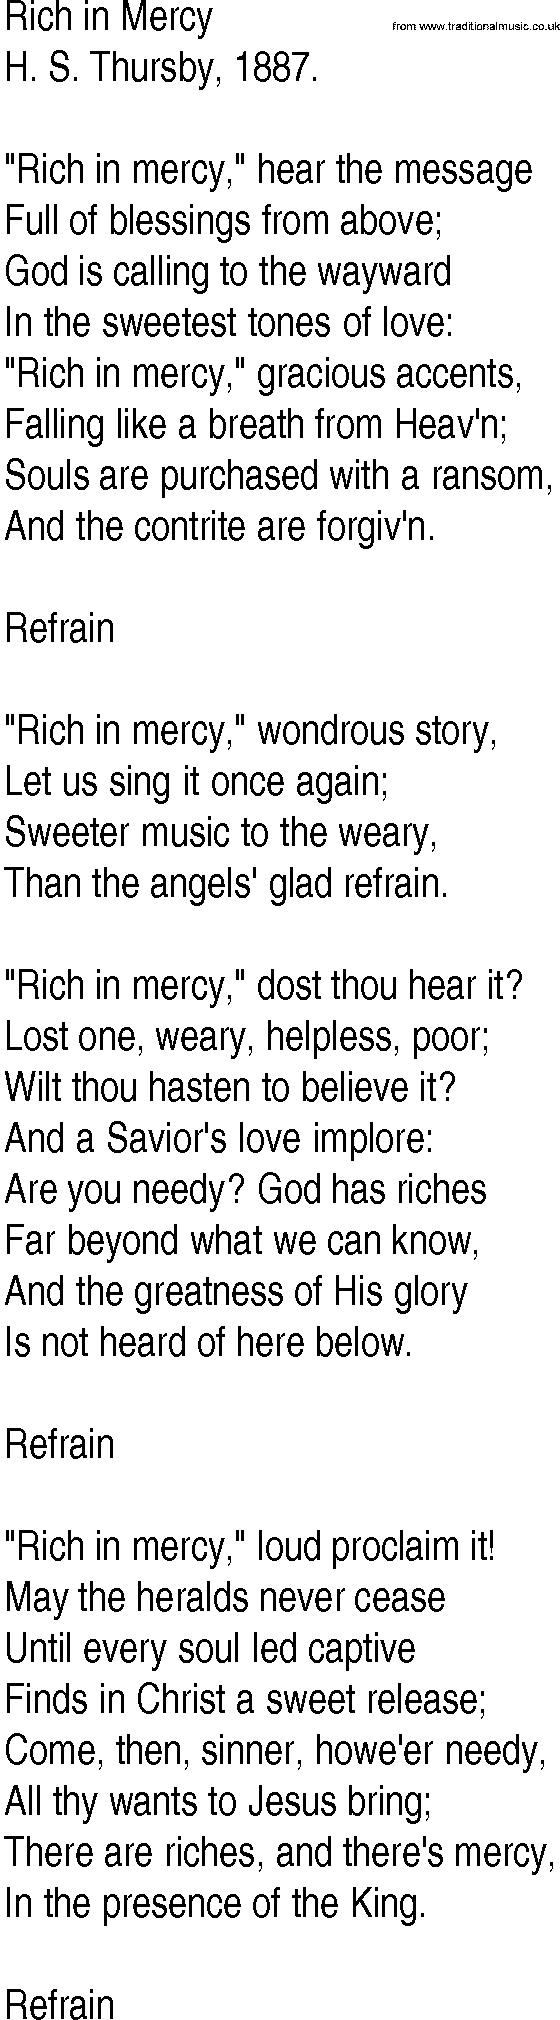 Hymn and Gospel Song: Rich in Mercy by H S Thursby lyrics